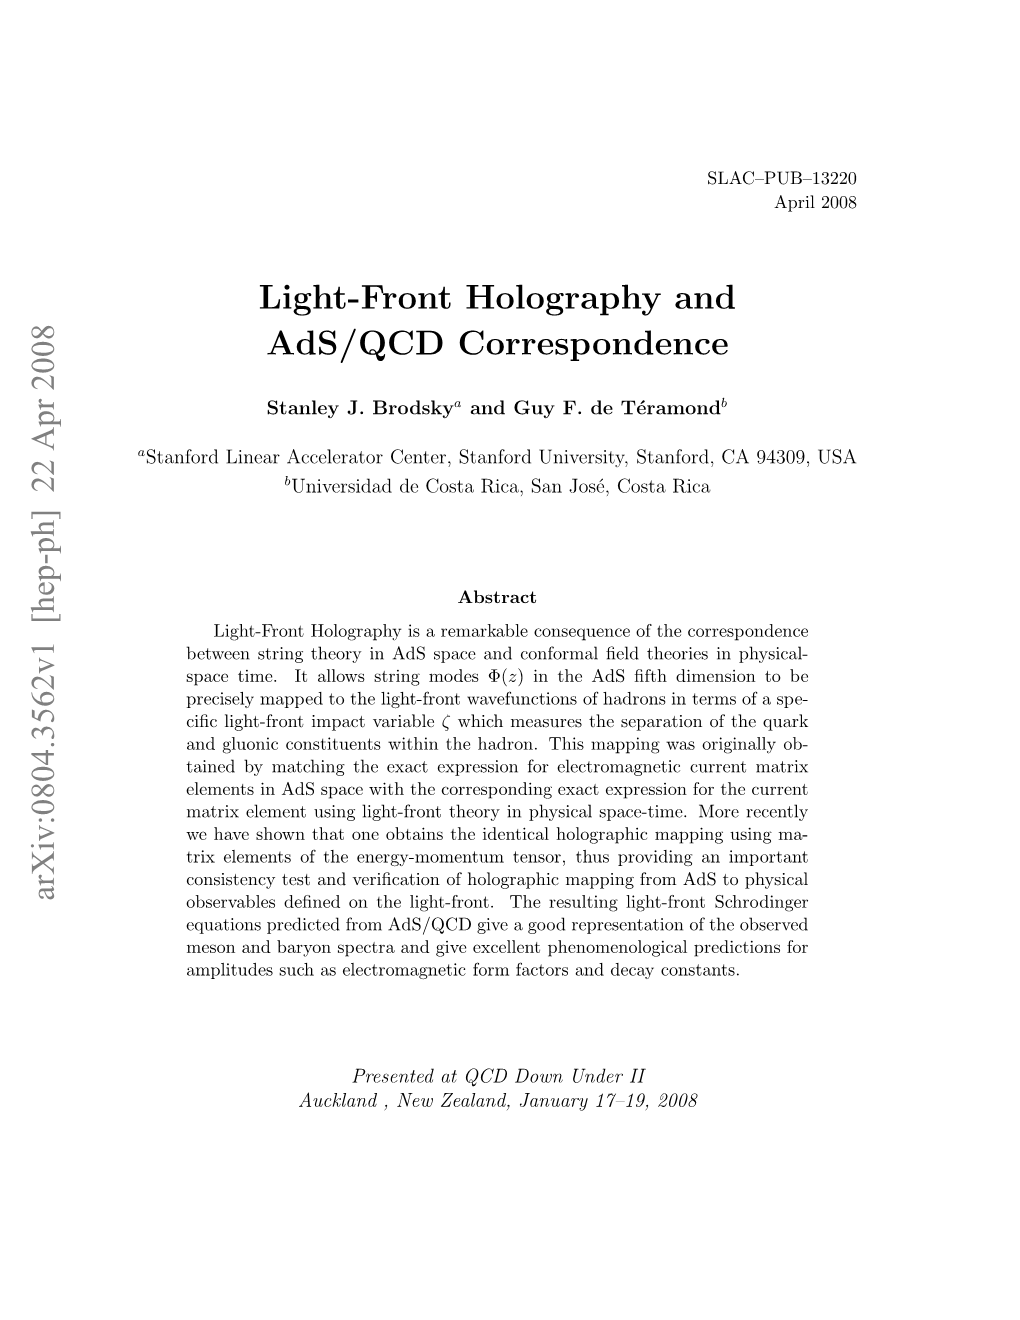 Light-Front Holography and Ads/QCD Correspondence